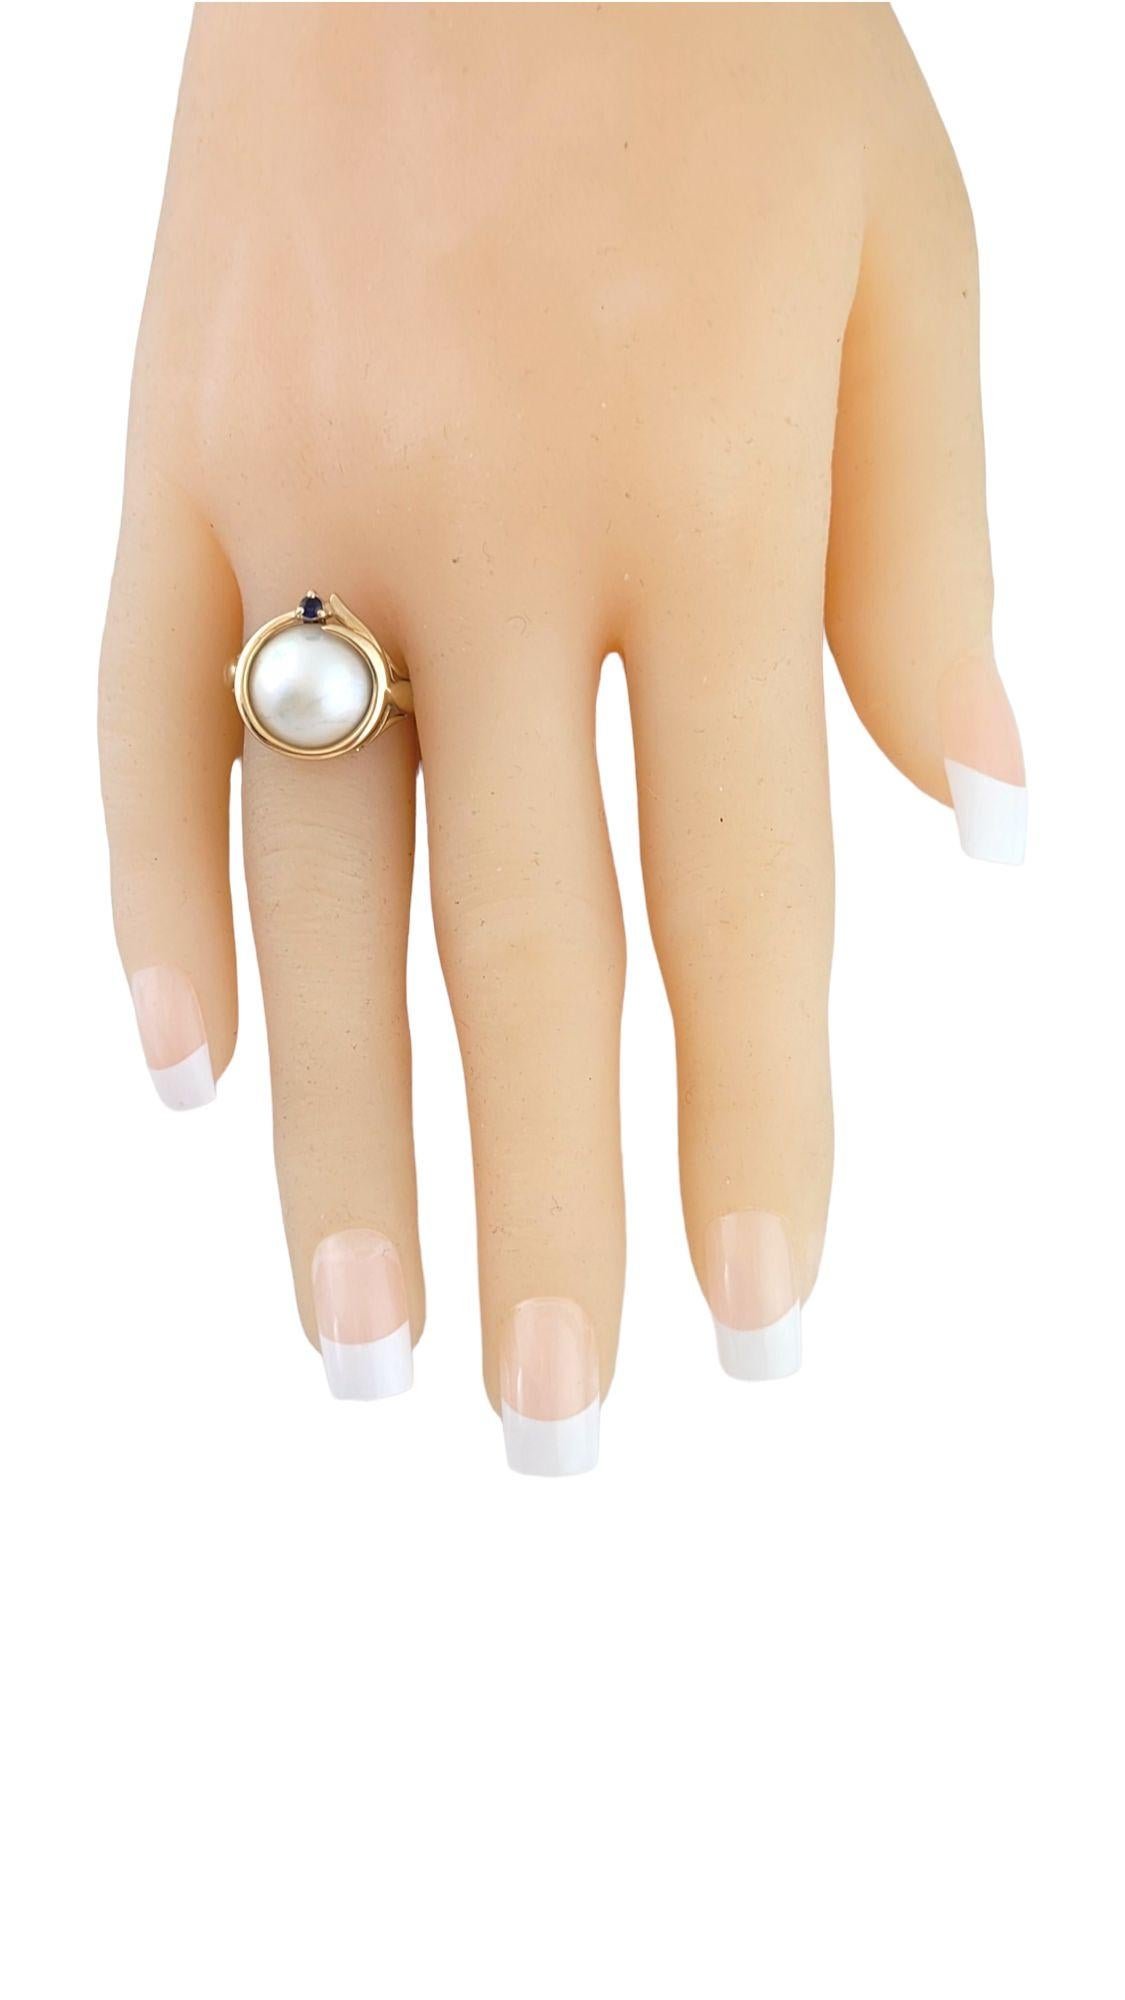 14K Yellow Gold Mabe Pearl Ring with Sapphire Size 8.5 #14609 1